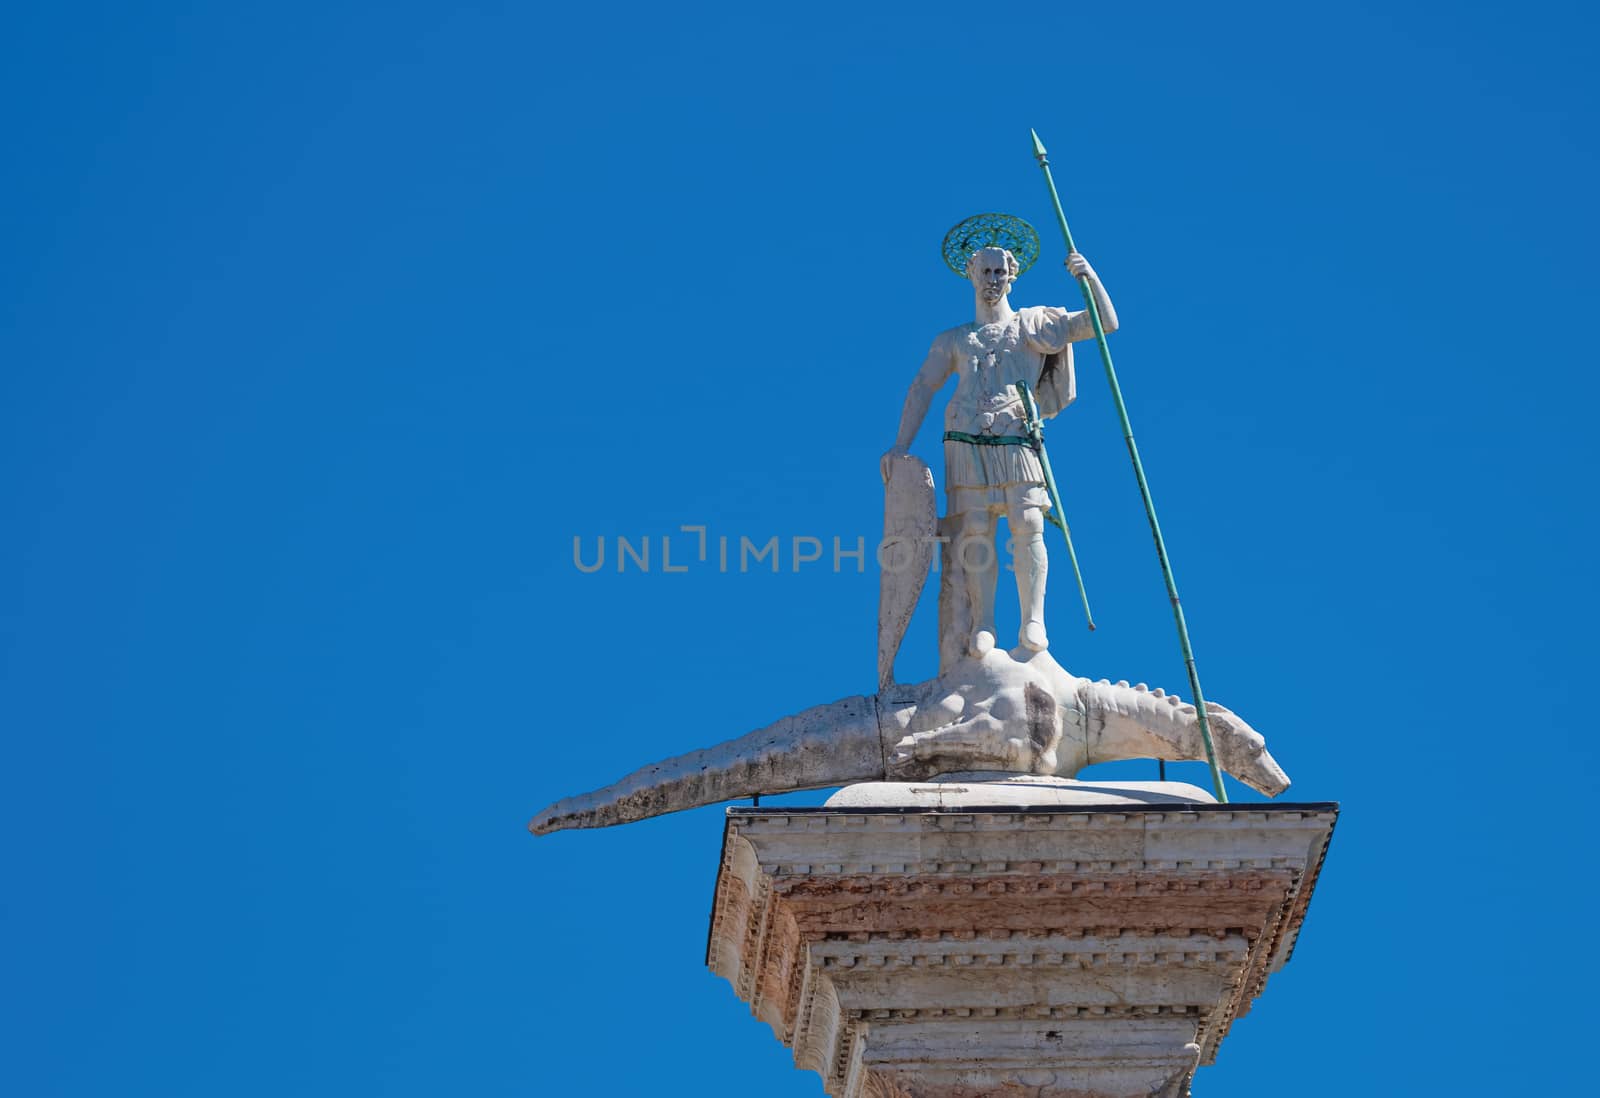 Saint Theodore medieval statue with bronze lance and shield trampling evil dragon, at the top of an ancient column erected in the 12th century in Venice